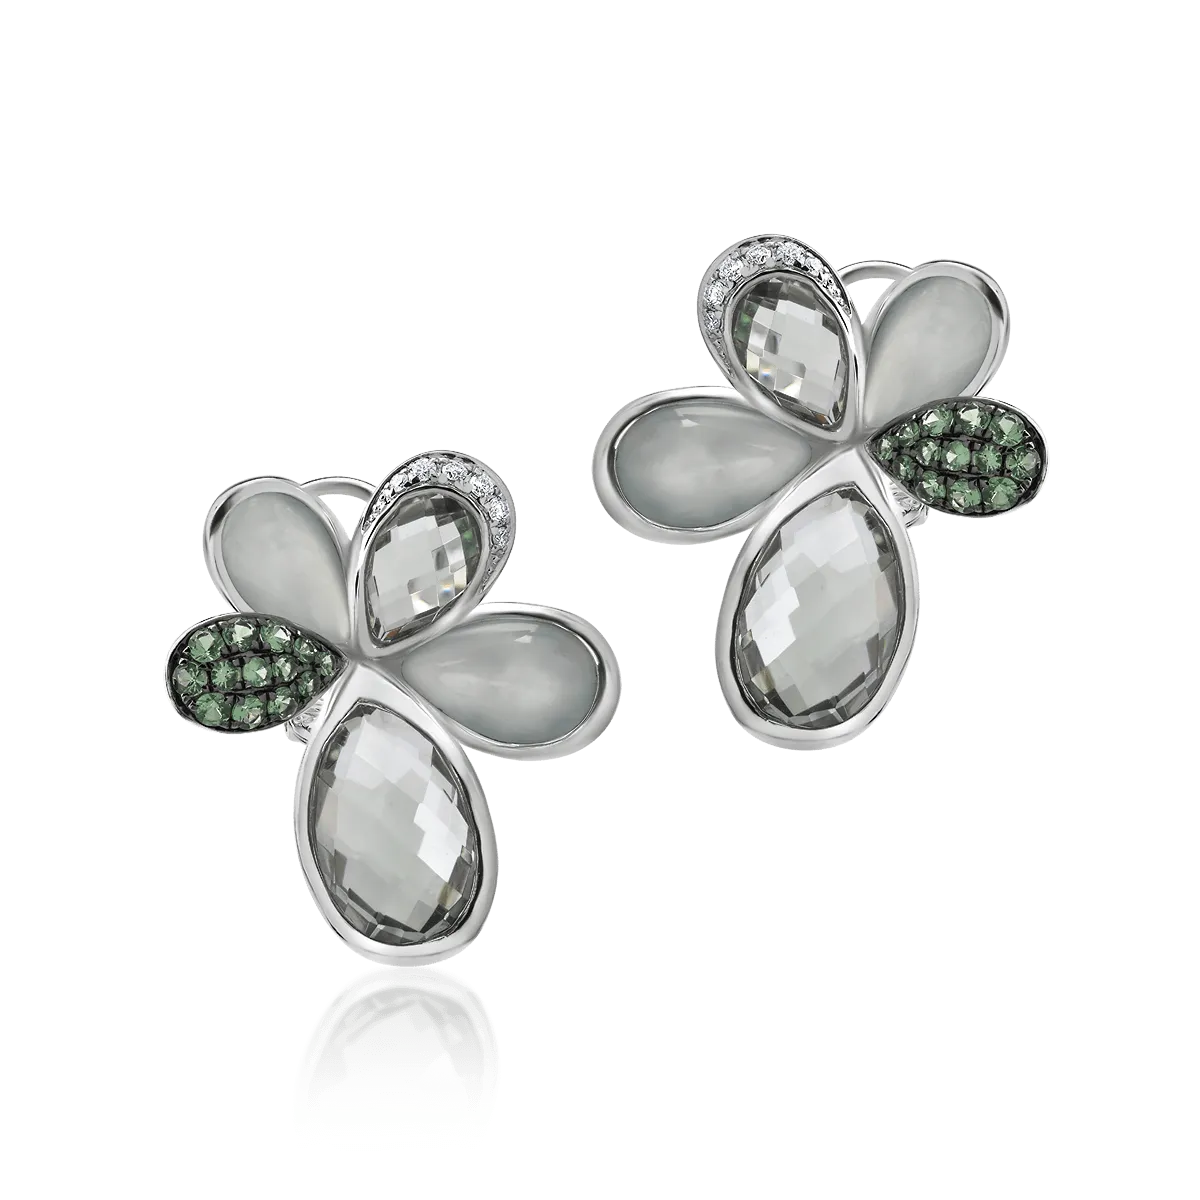 18K white gold earrings with 14.71ct precious and semiprecious stones